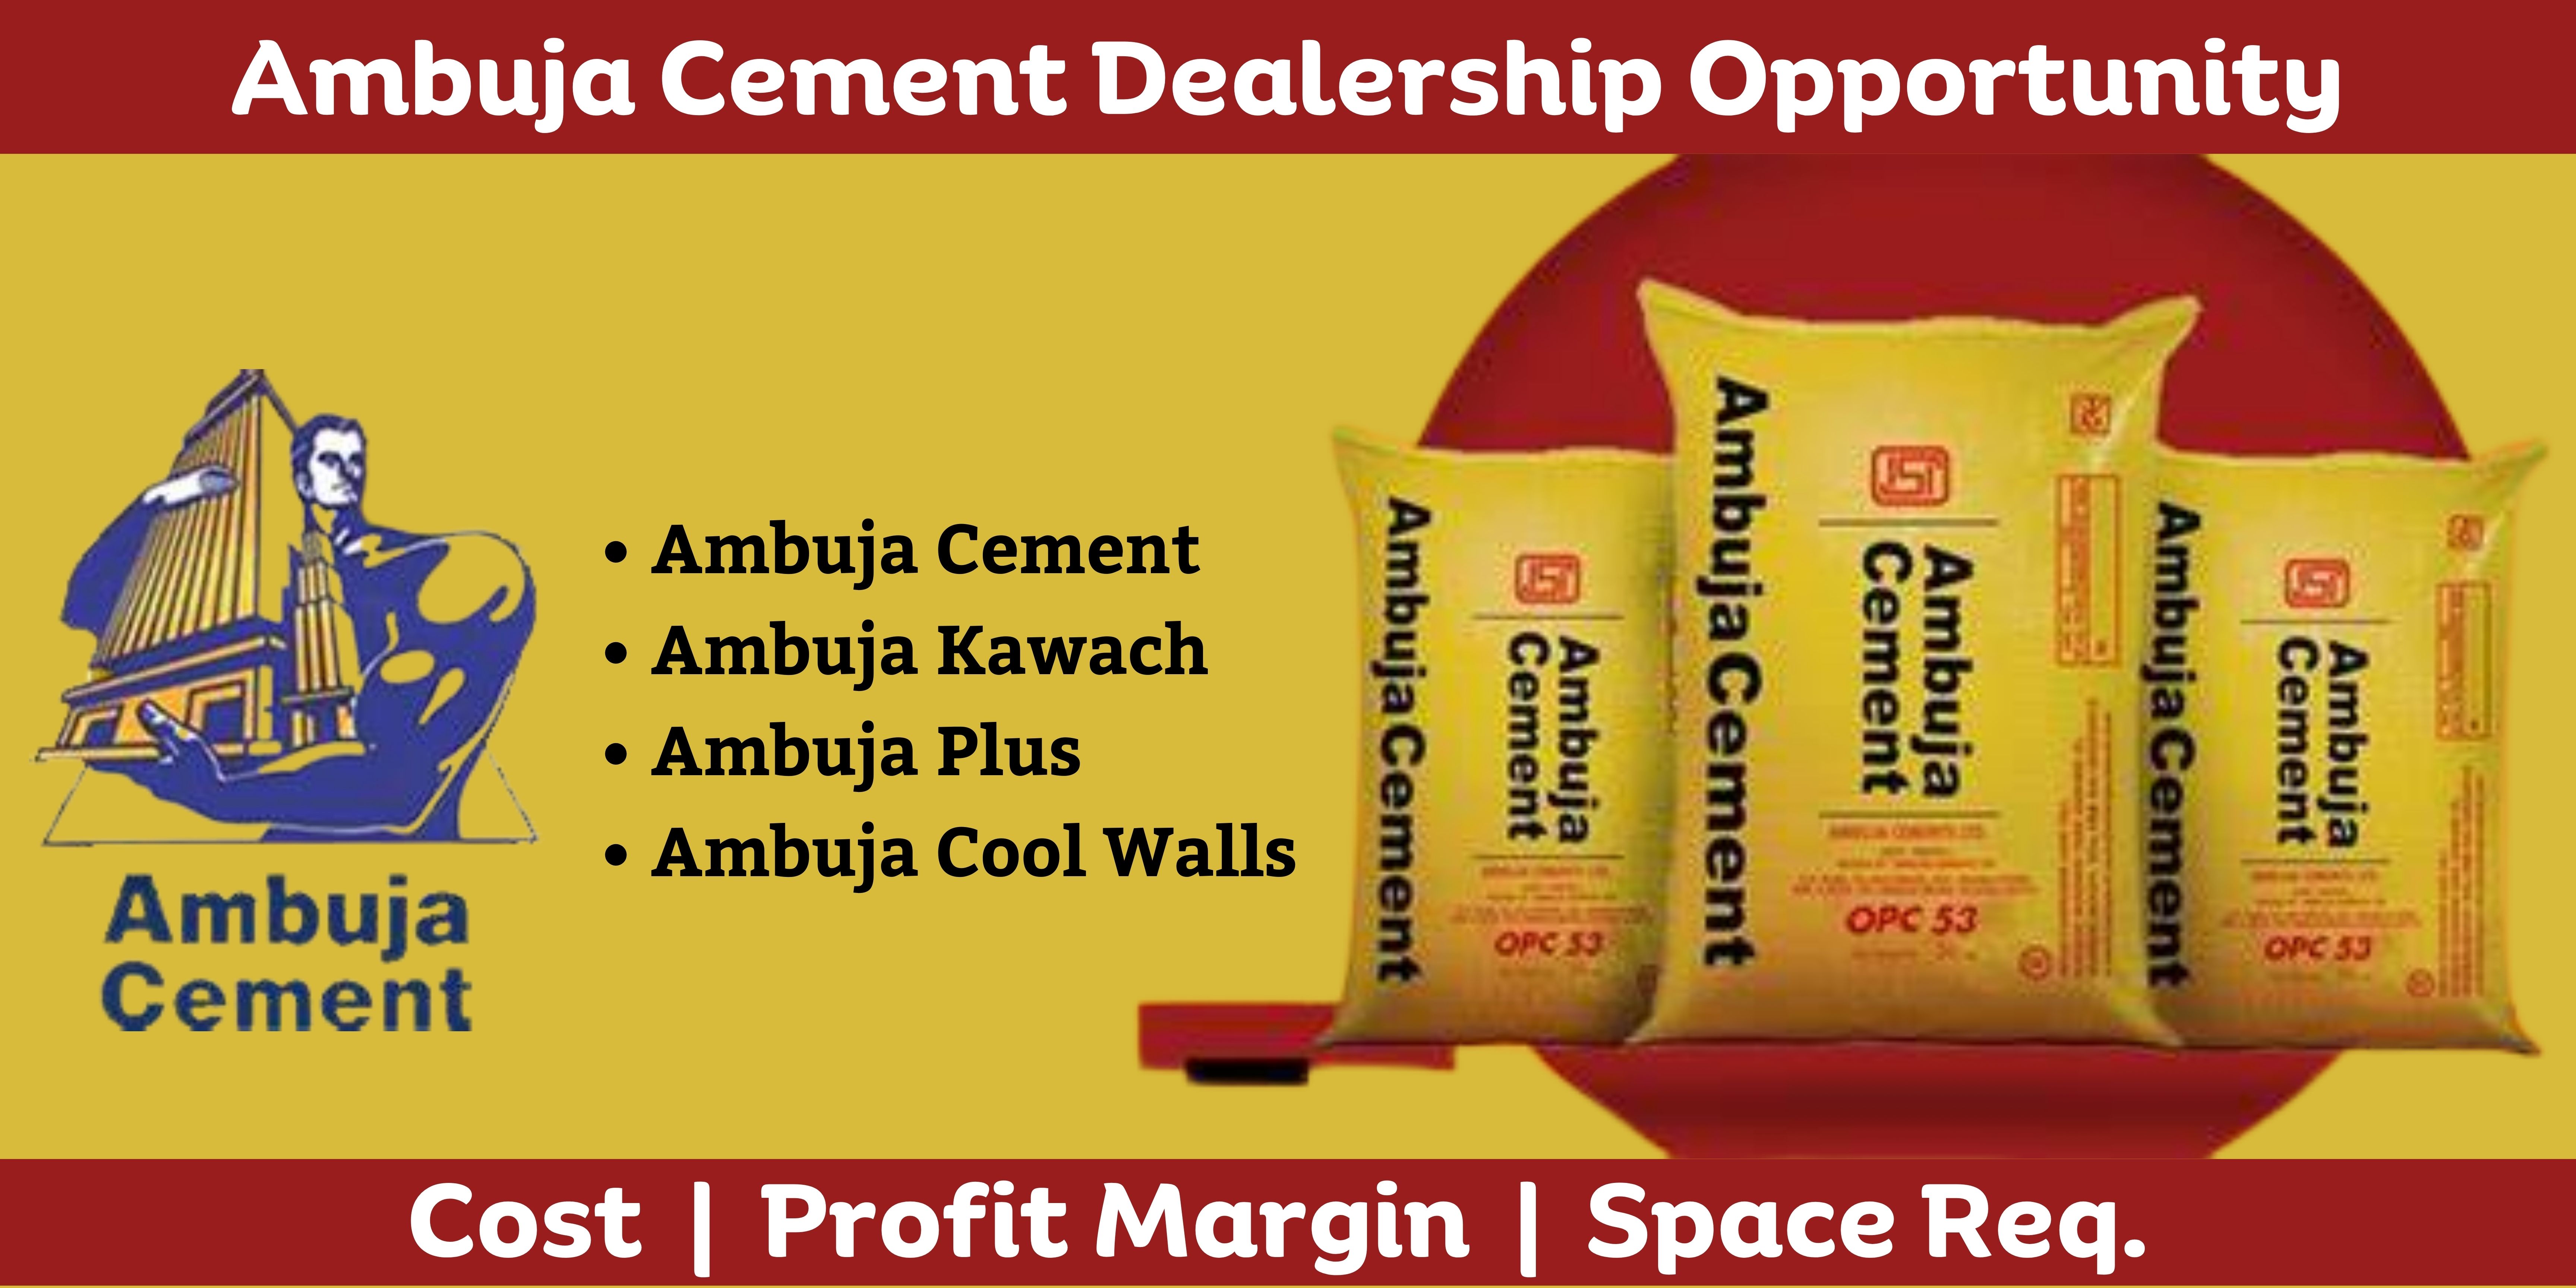 How to Get Ambuja Cement Dealership Opportunity